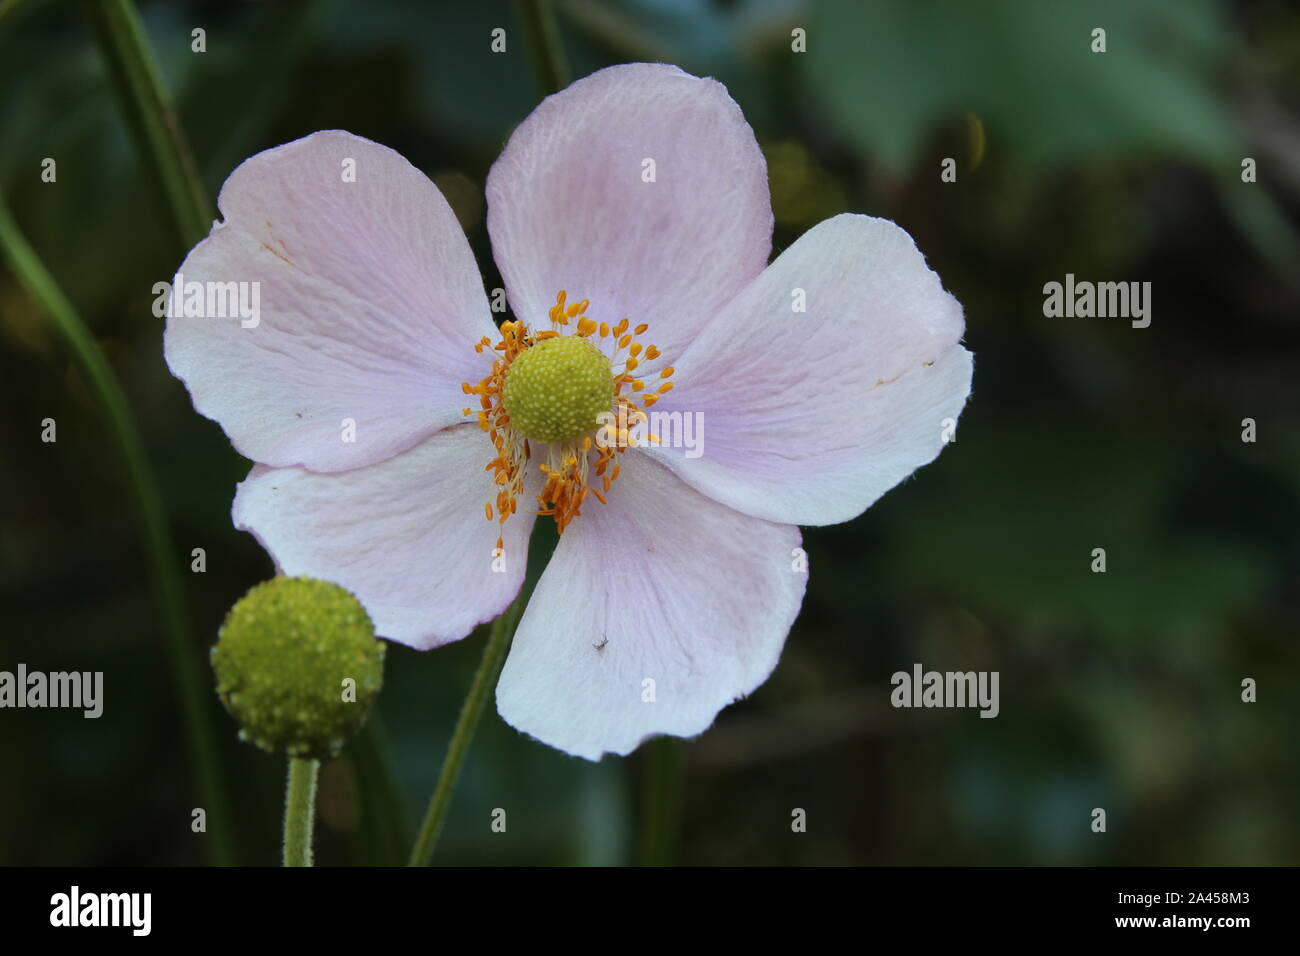 An nice Anemone on a green background Stock Photo